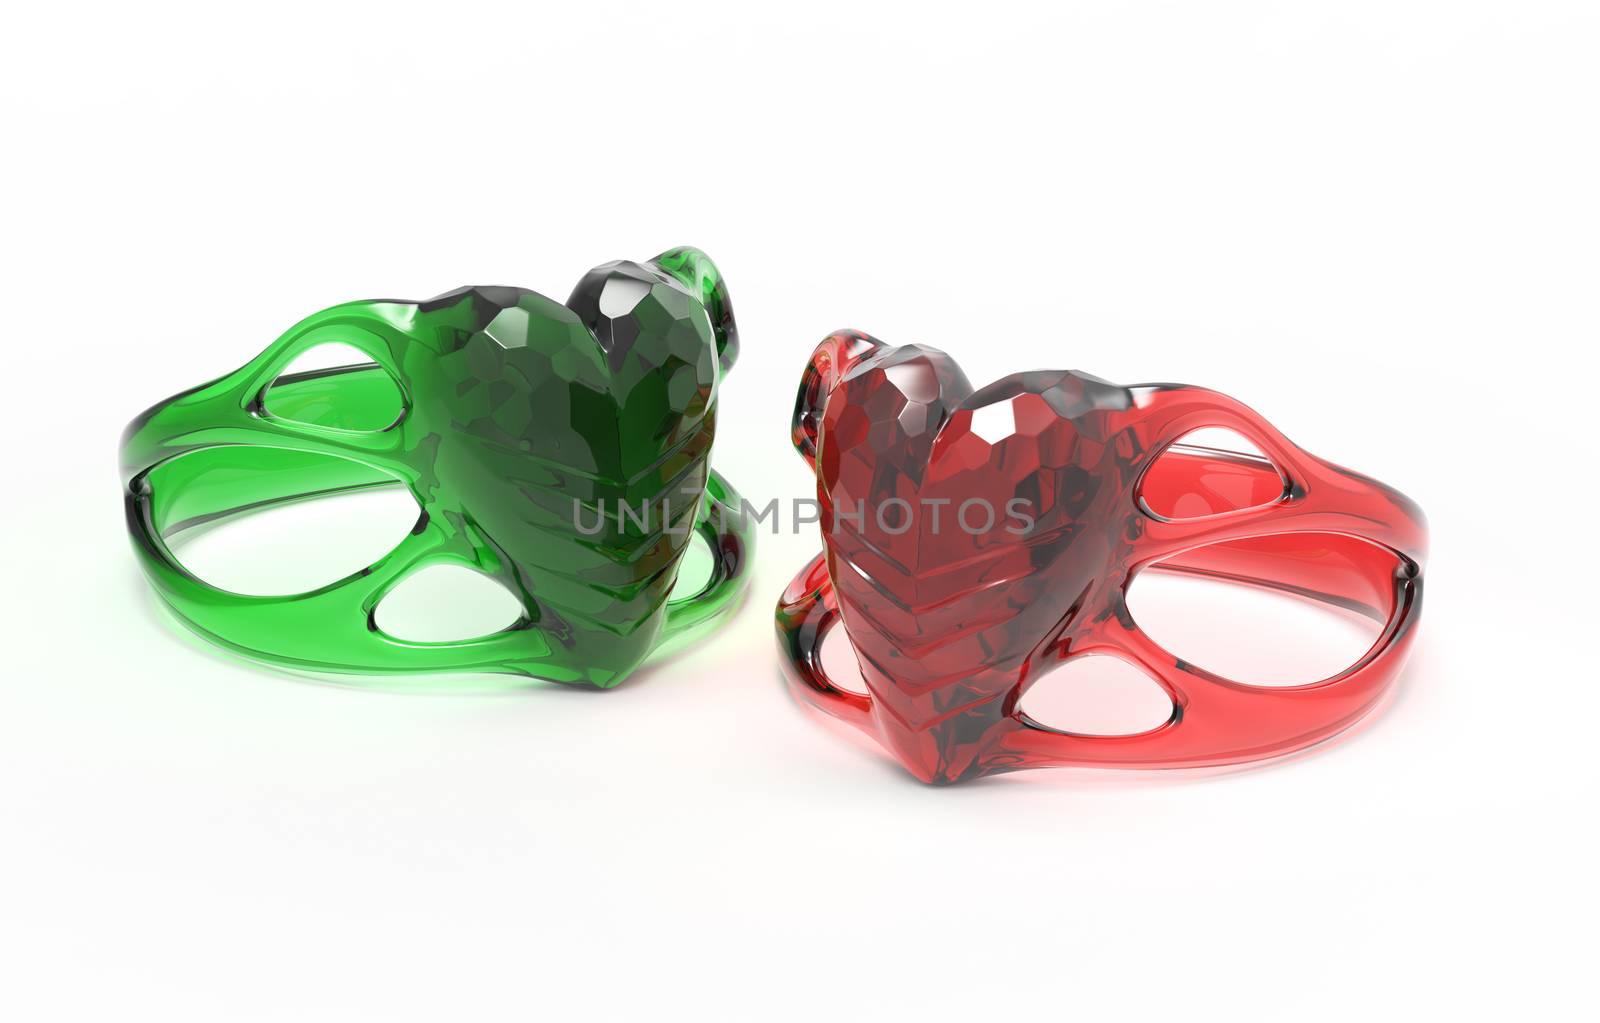 two transparent sculpted heart shaped wedding rings isolated on white. 3d illustration.